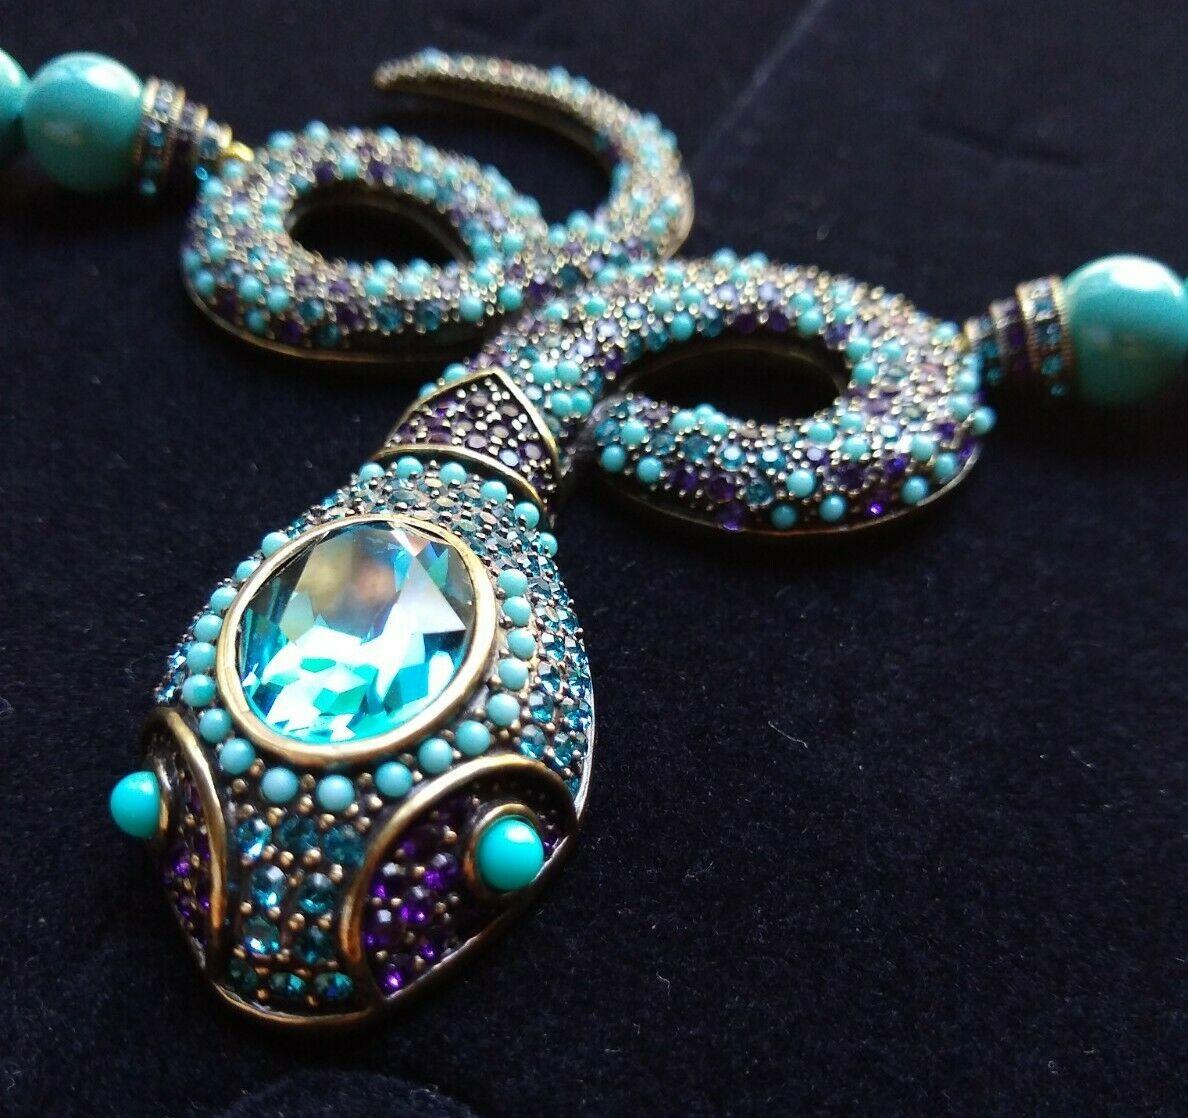 Chic and Dramatic, Designer faux Turquoise Necklace suspending a highly detailed Snake Serpent encrusted with faux Turquoise and pave-set sparkling Crystals. Signed HEIDI DAUS. Necklace measures approx. 25” long; chain allows adjustable length(s).